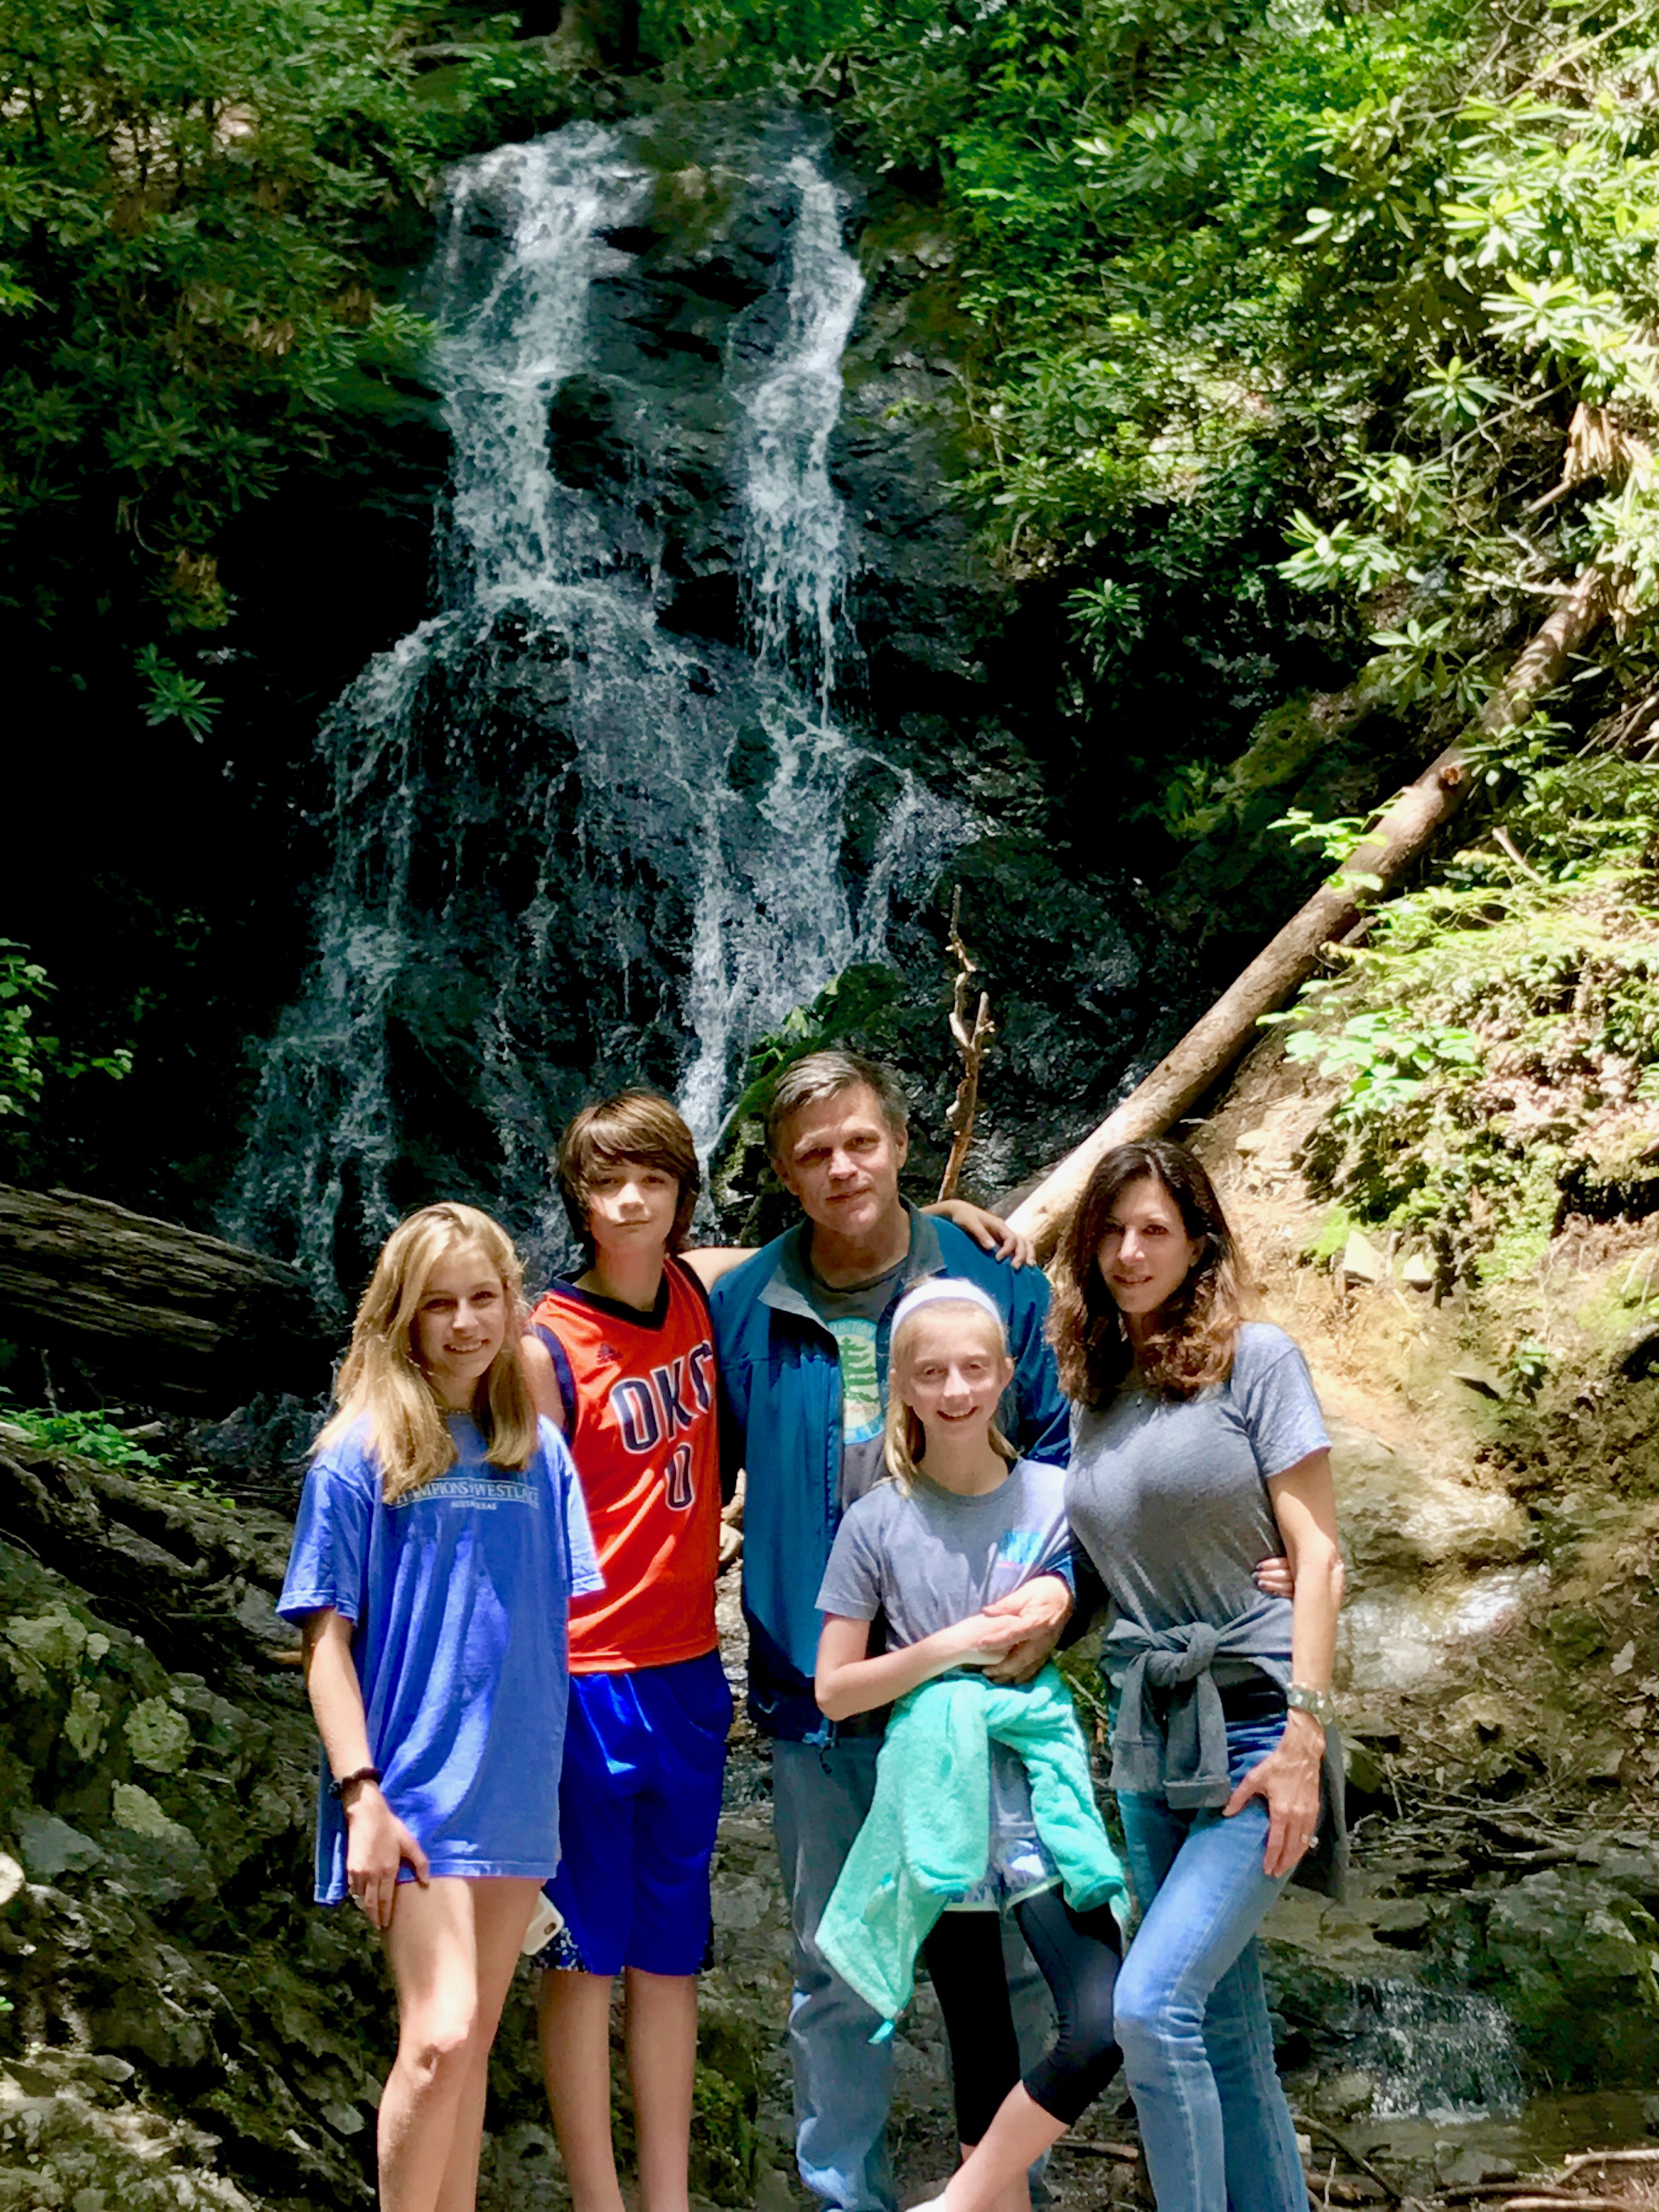 Douglas Brinkley and family hiking